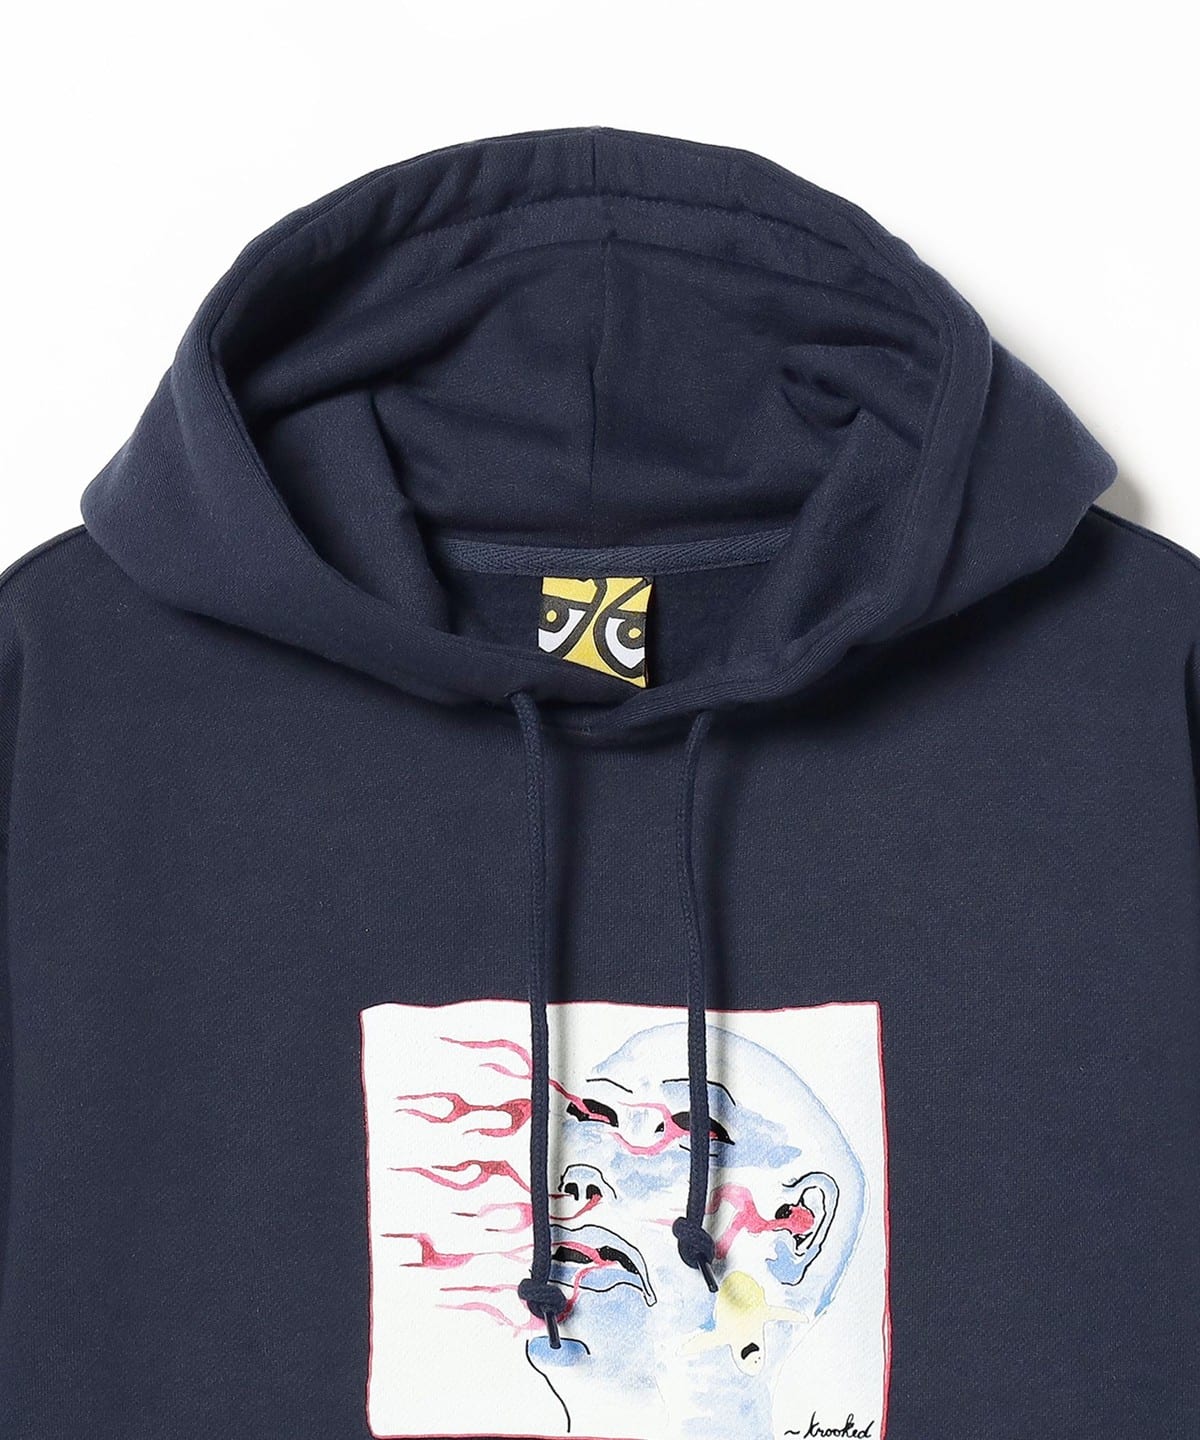 BEAMS（ビームス）KROOKED / STARE HOODIE（トップス パーカー）通販